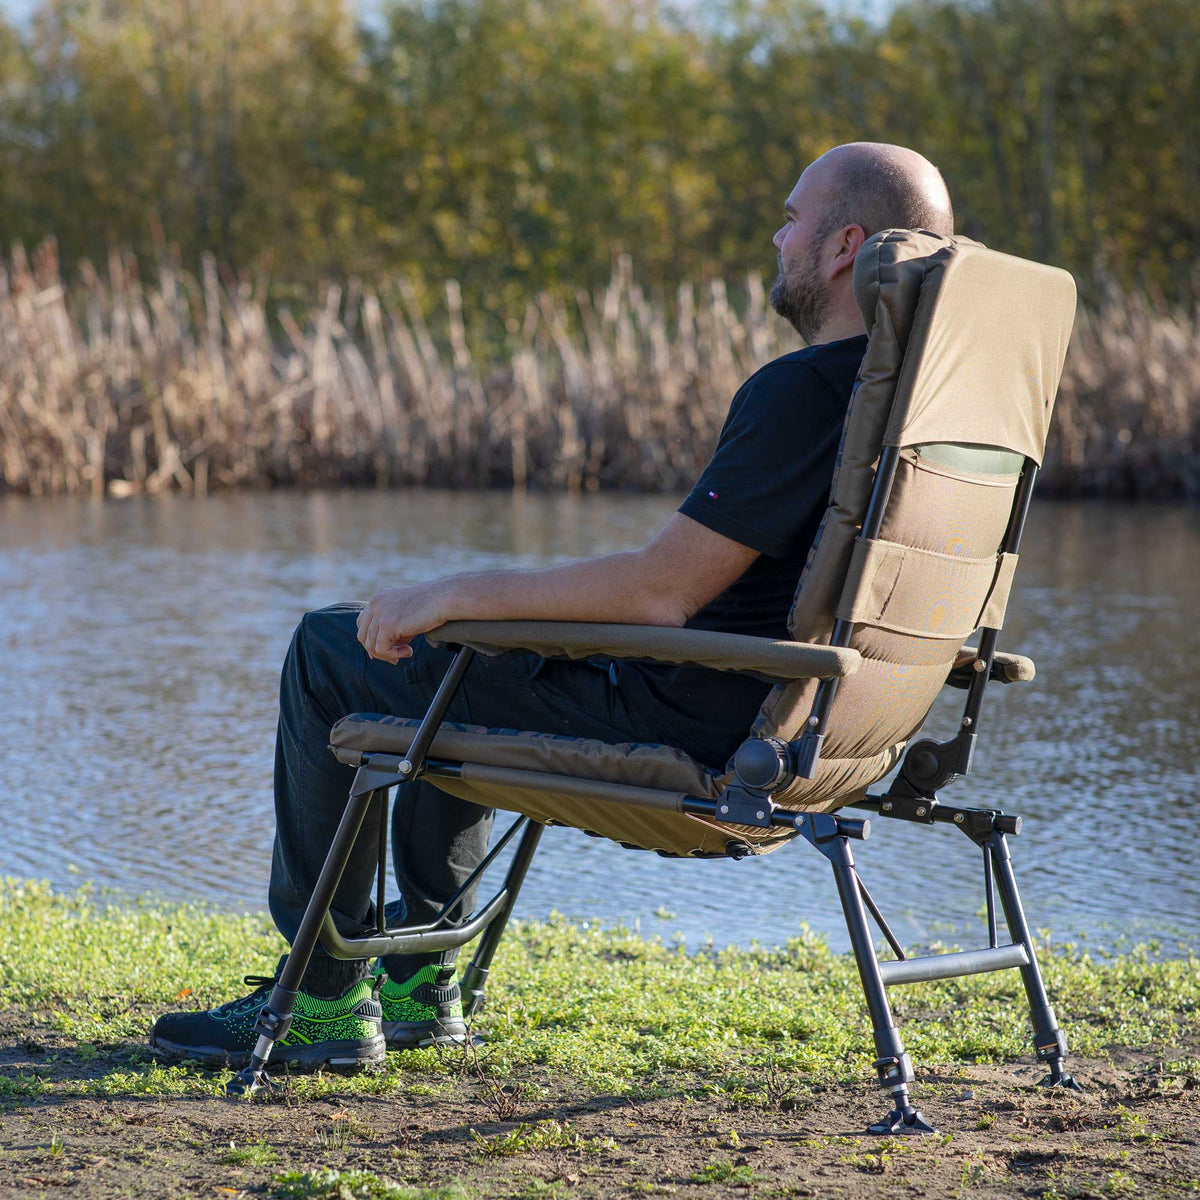 Dellonda Deluxe Portable Fishing/Camping Chair, Reclining, Padded Armrests